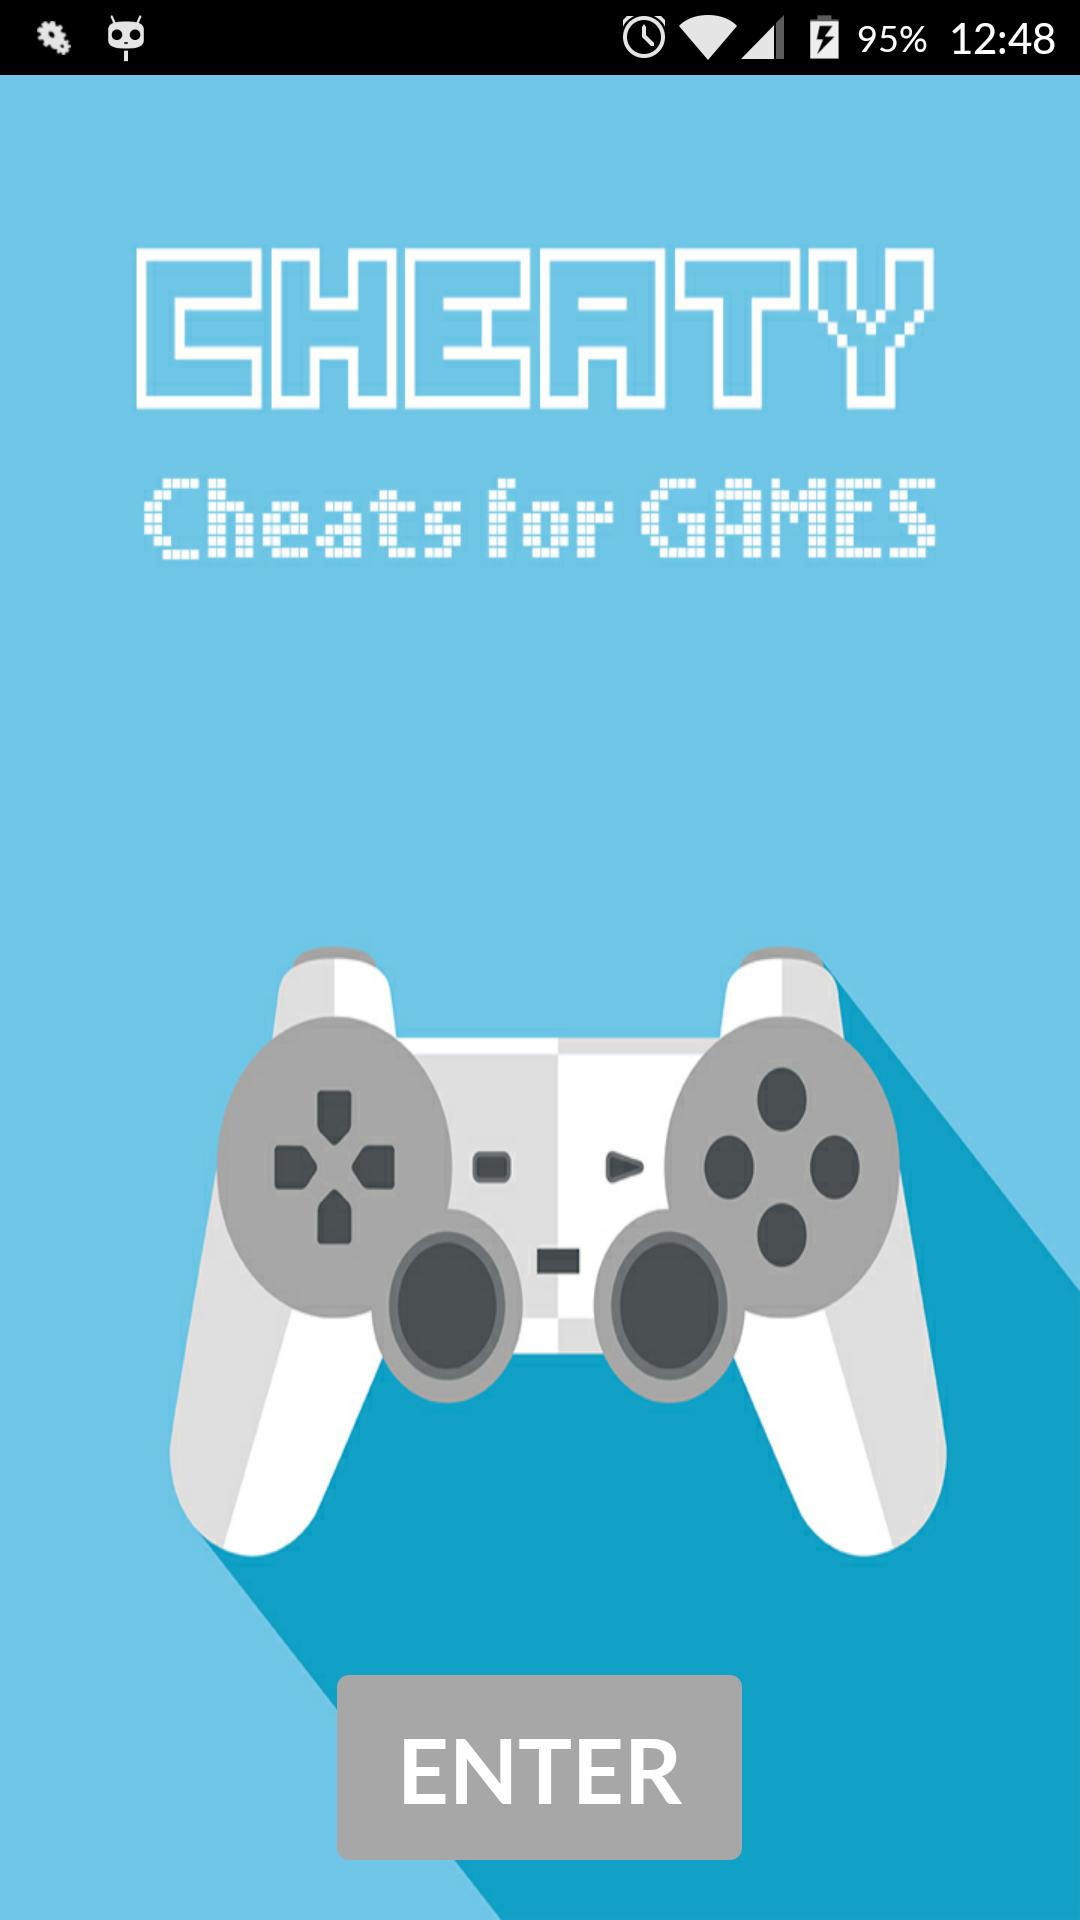 Game Cheats. Cheats for good Life.